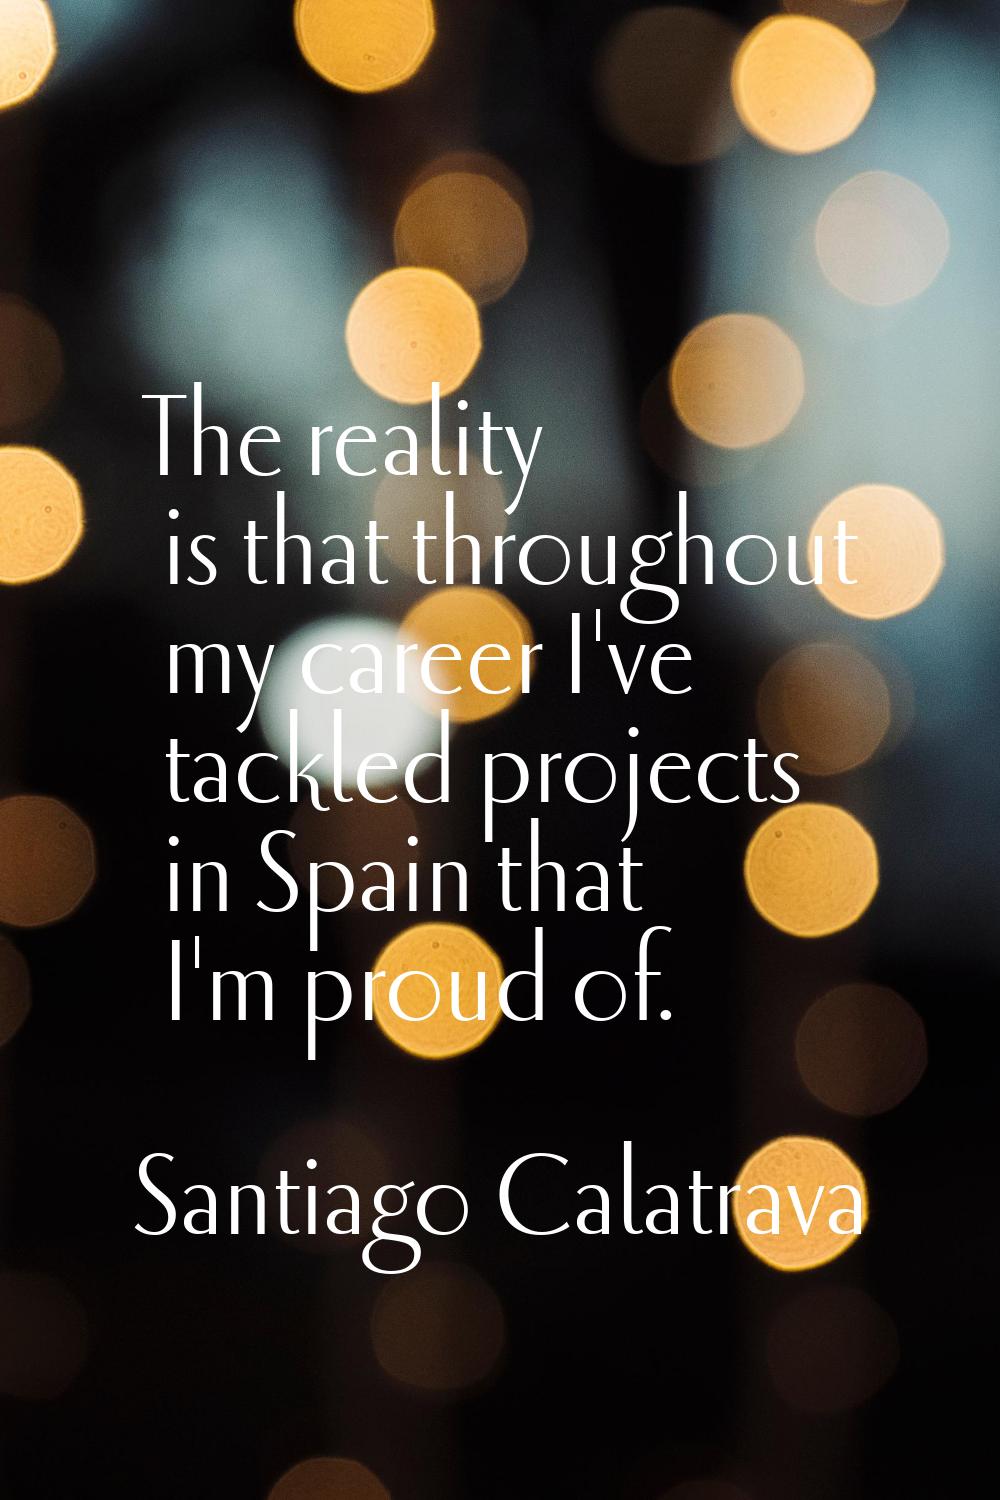 The reality is that throughout my career I've tackled projects in Spain that I'm proud of.